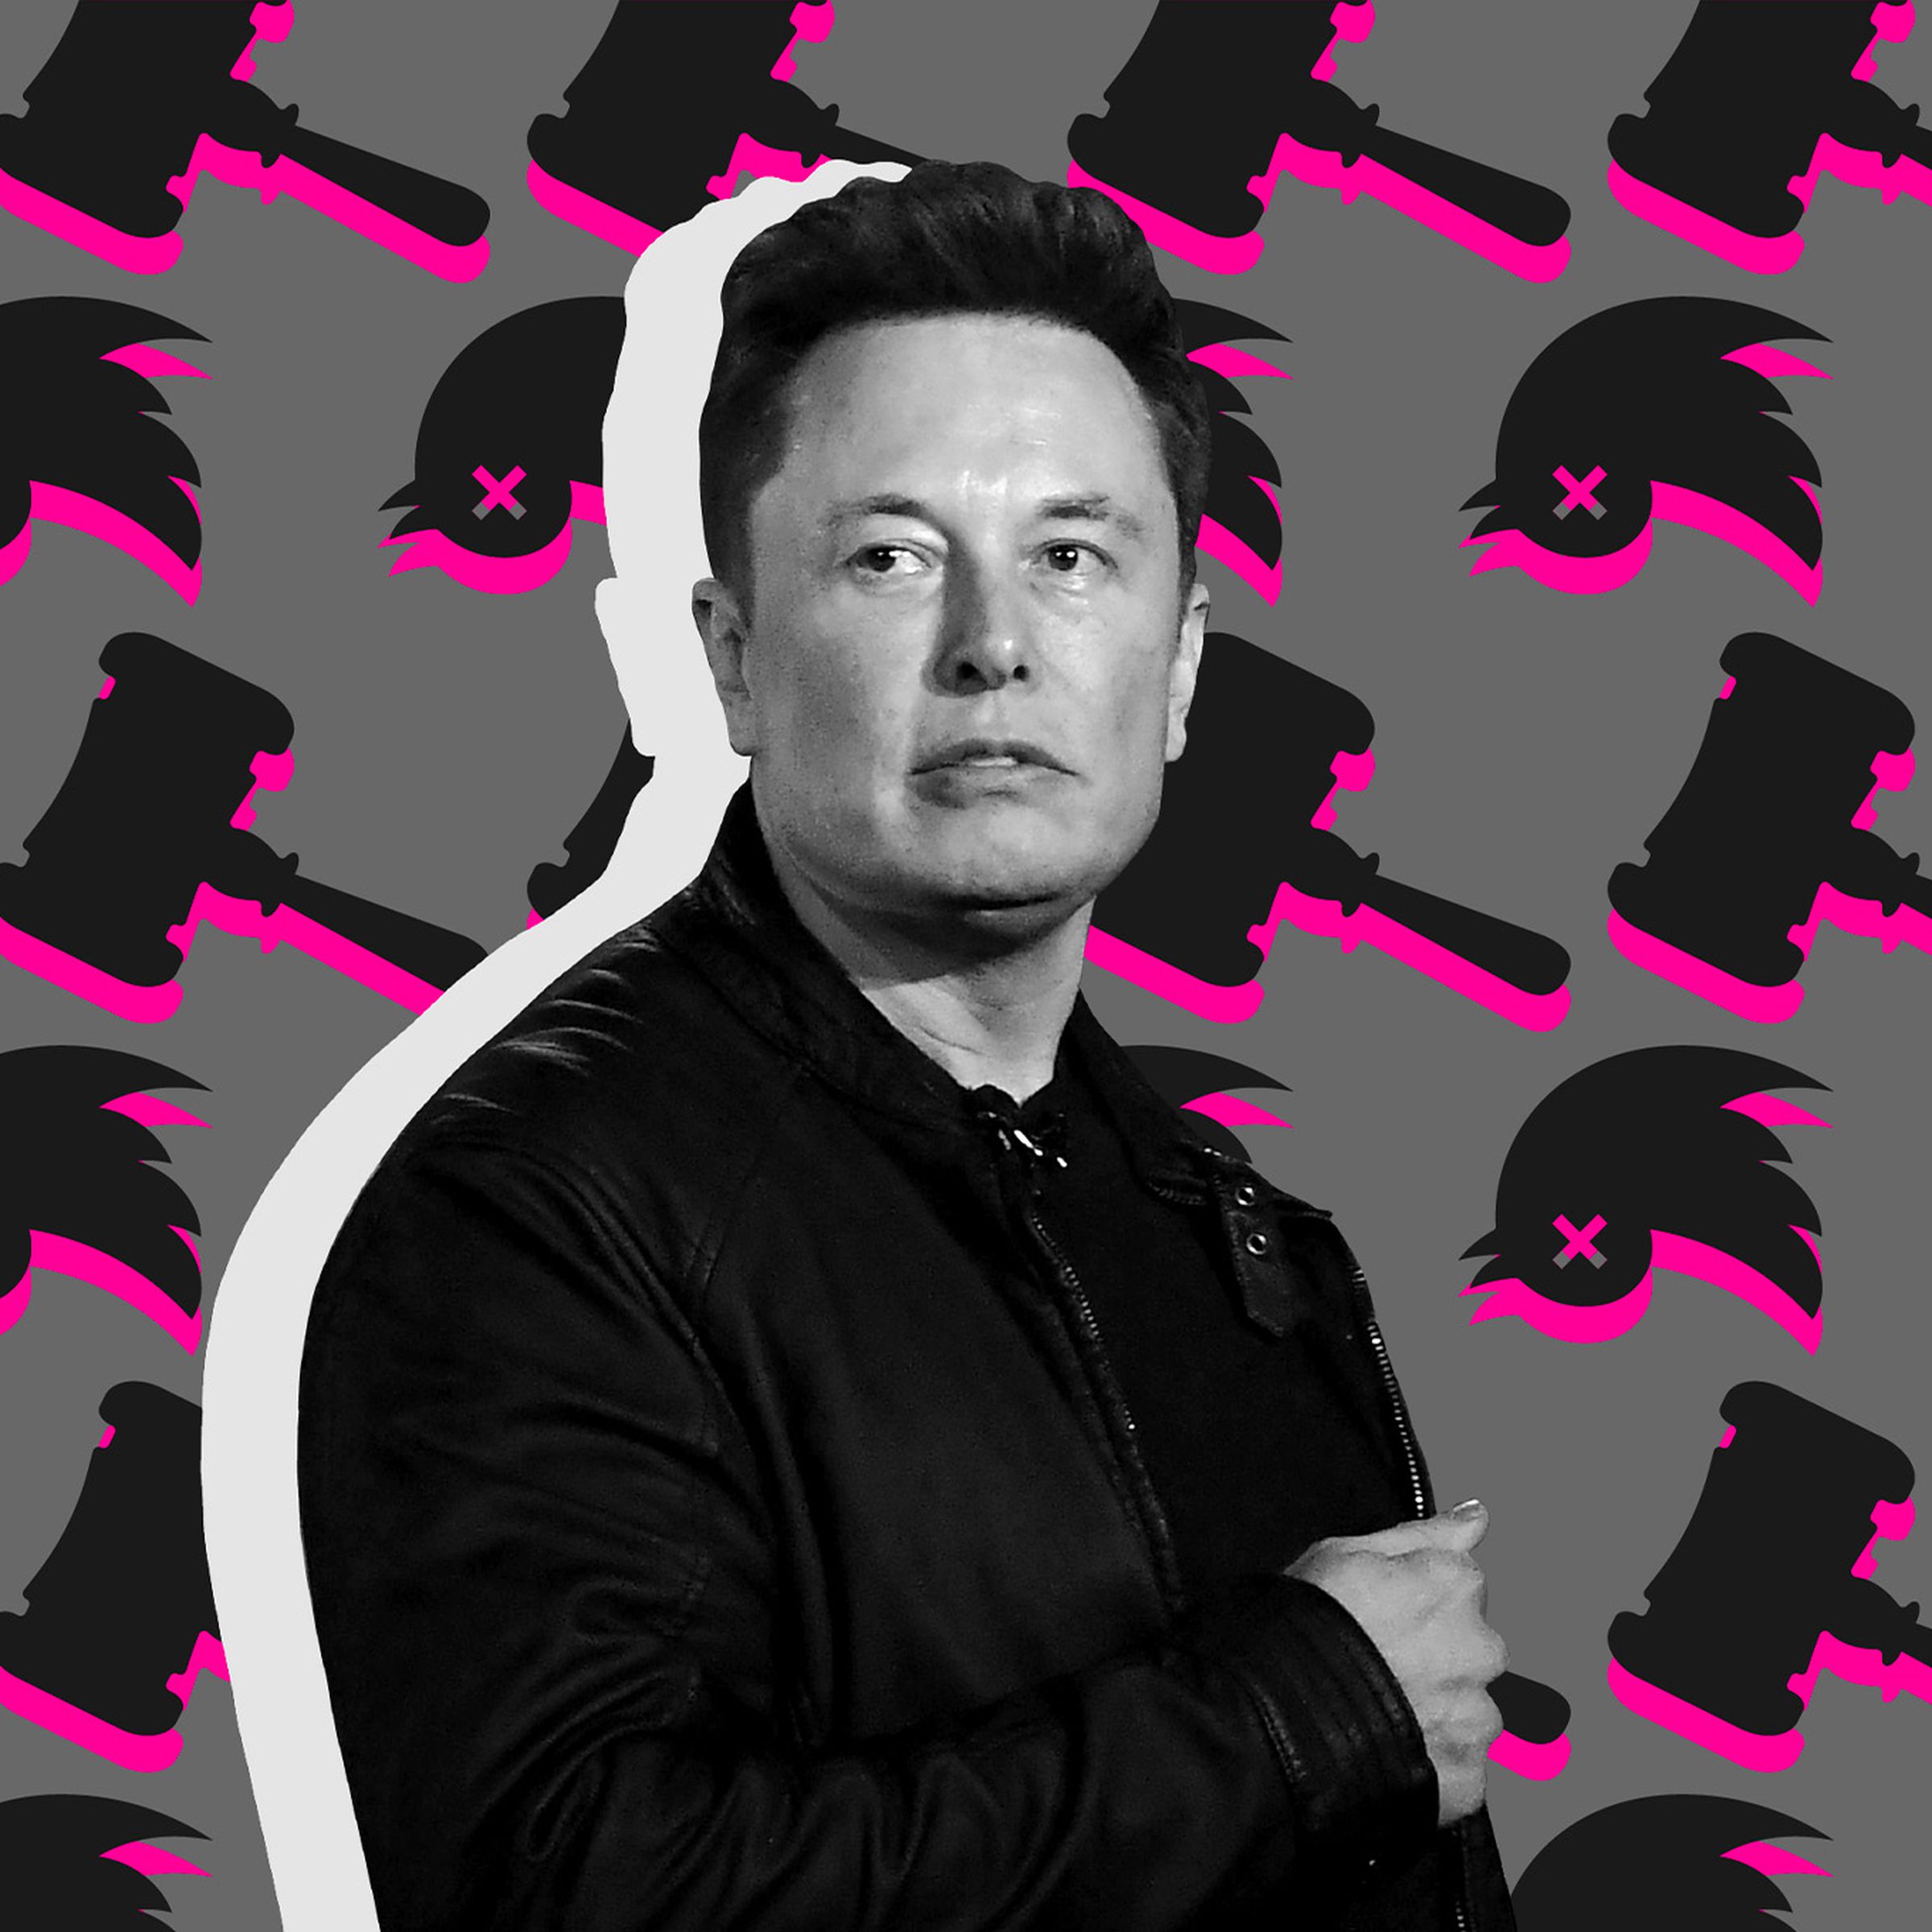 An image showing Elon Musk on a background with hammers